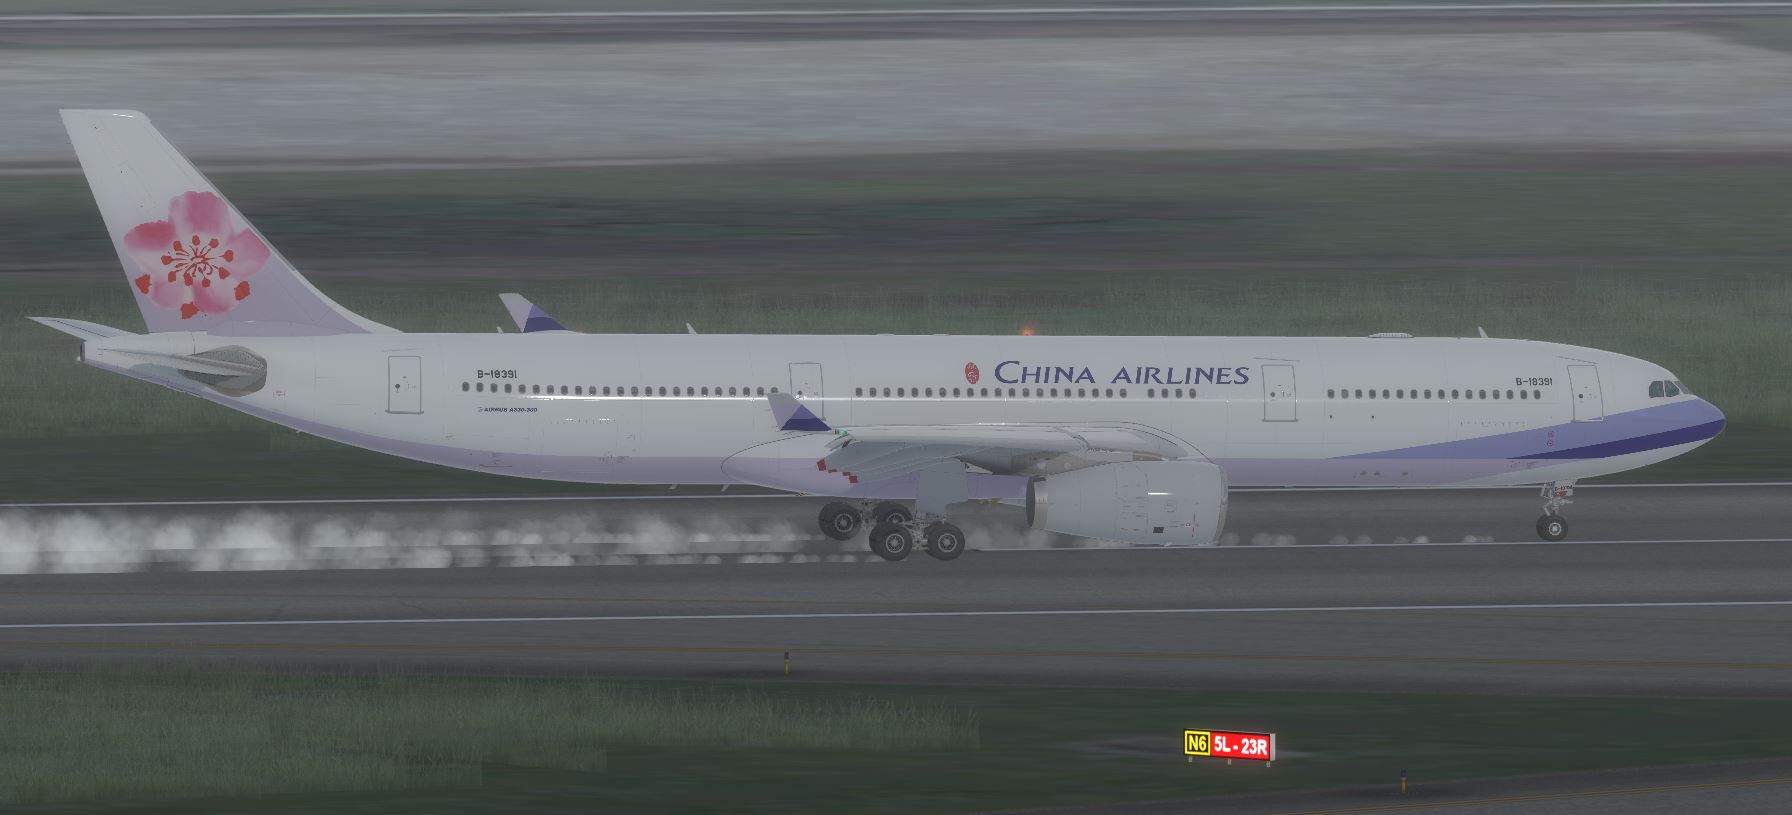 AS A330 ChinaAirline-4432 